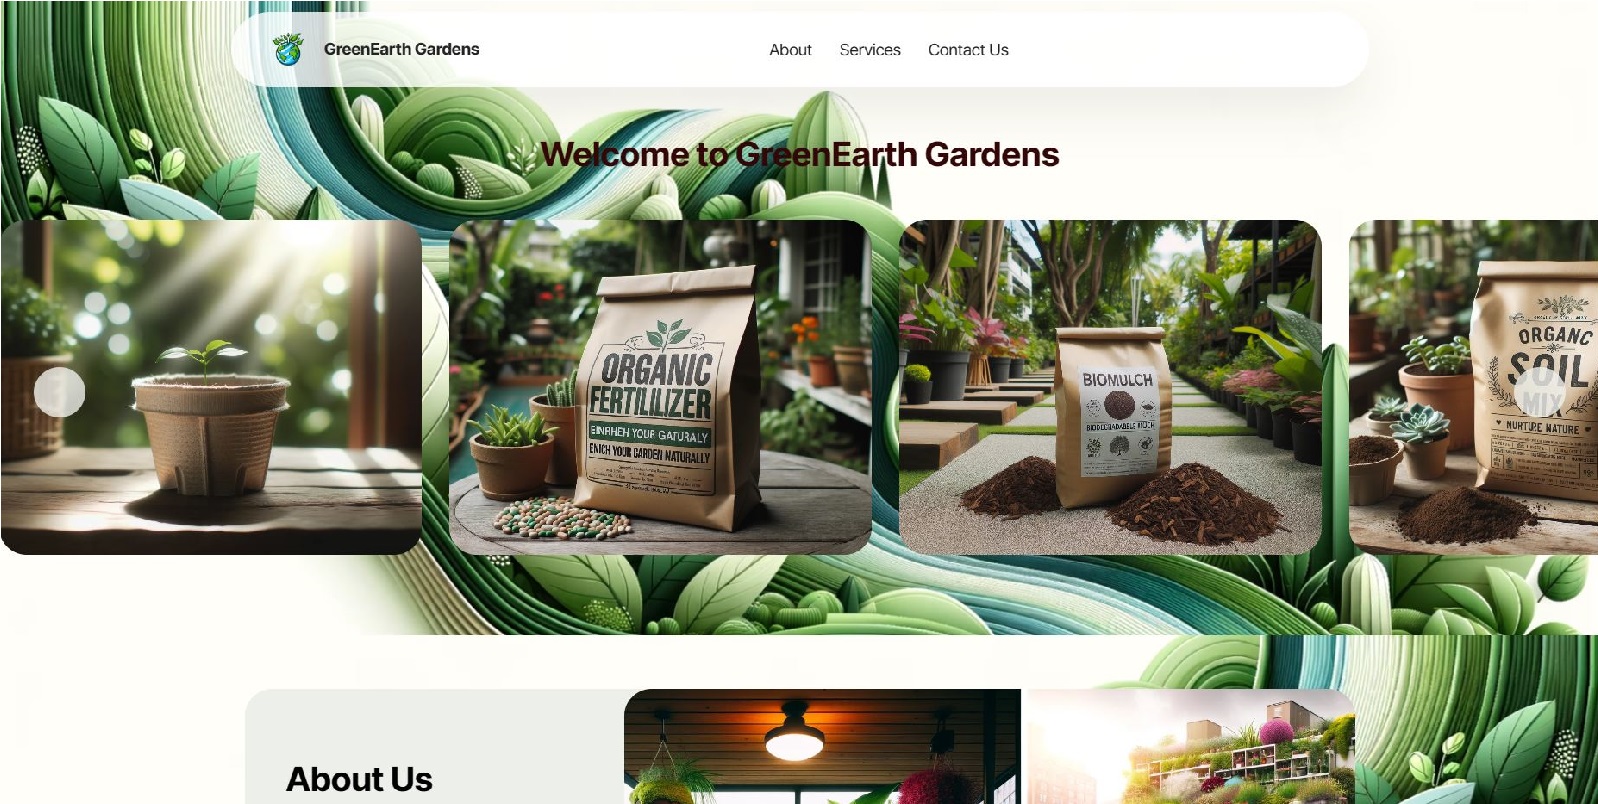 Green Earth Gardens - Urban Gardens Products - Startup Template